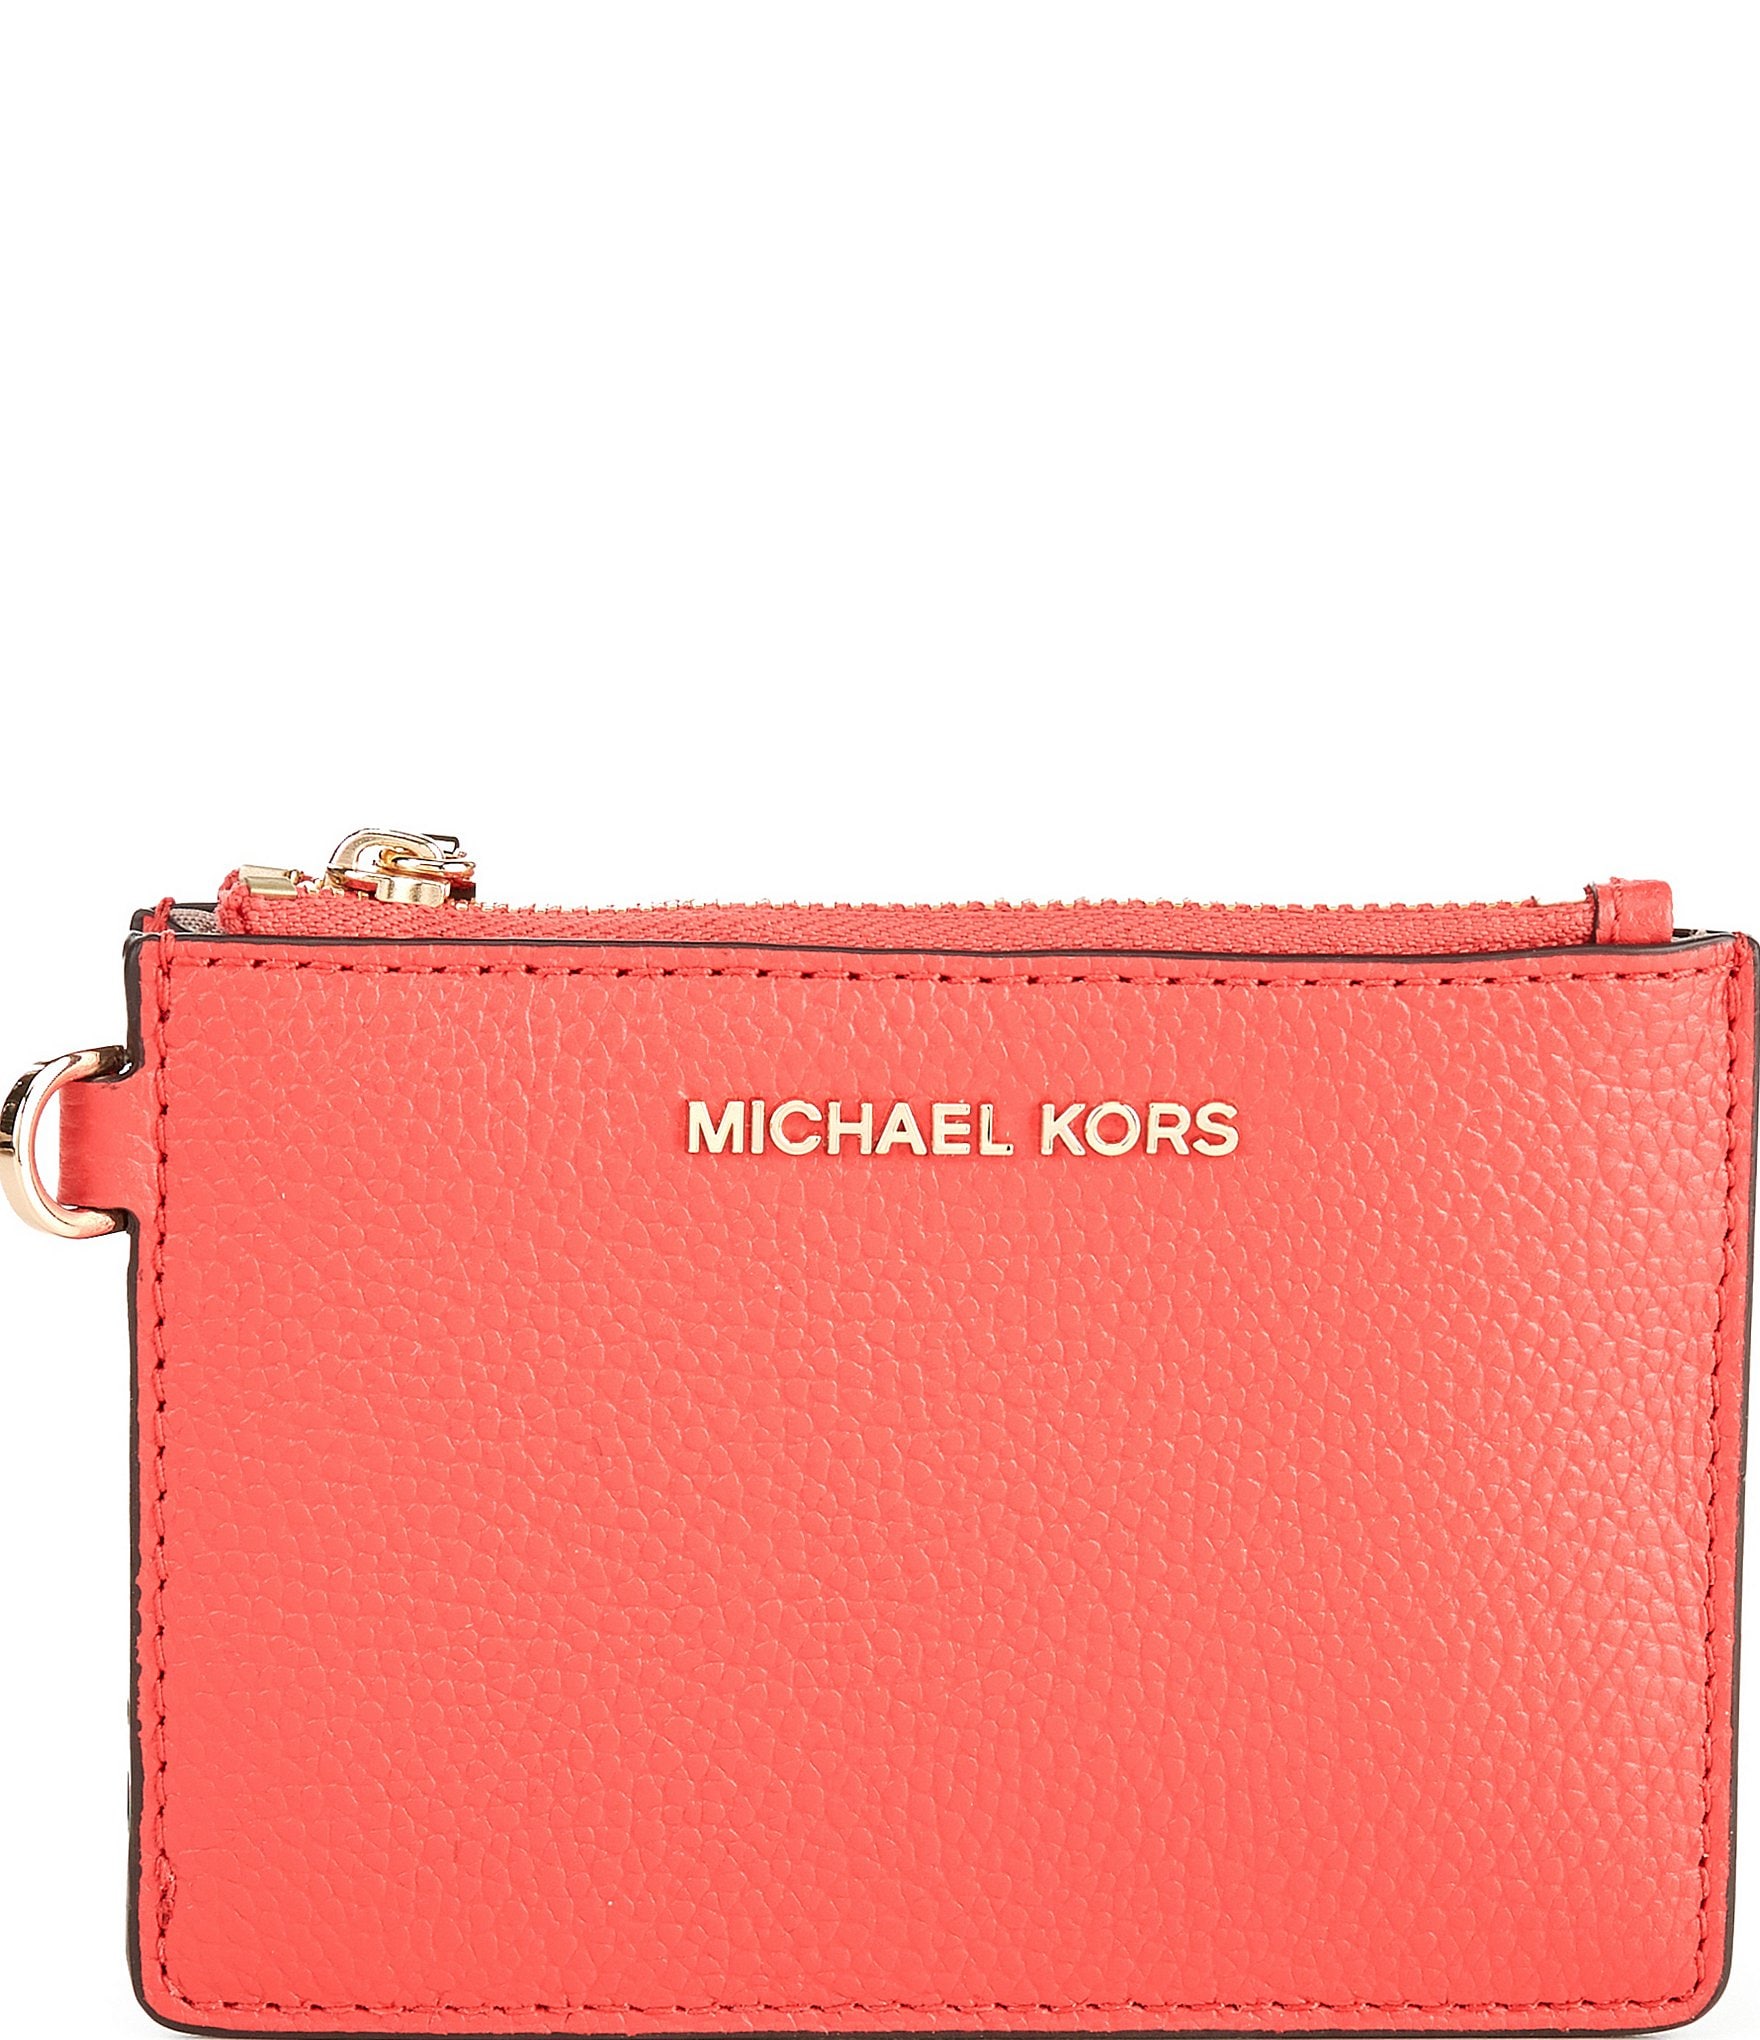 Michael Kors Avril small satchel with adjustable strap | Handbags michael  kors, Michael kors, Patent leather bag